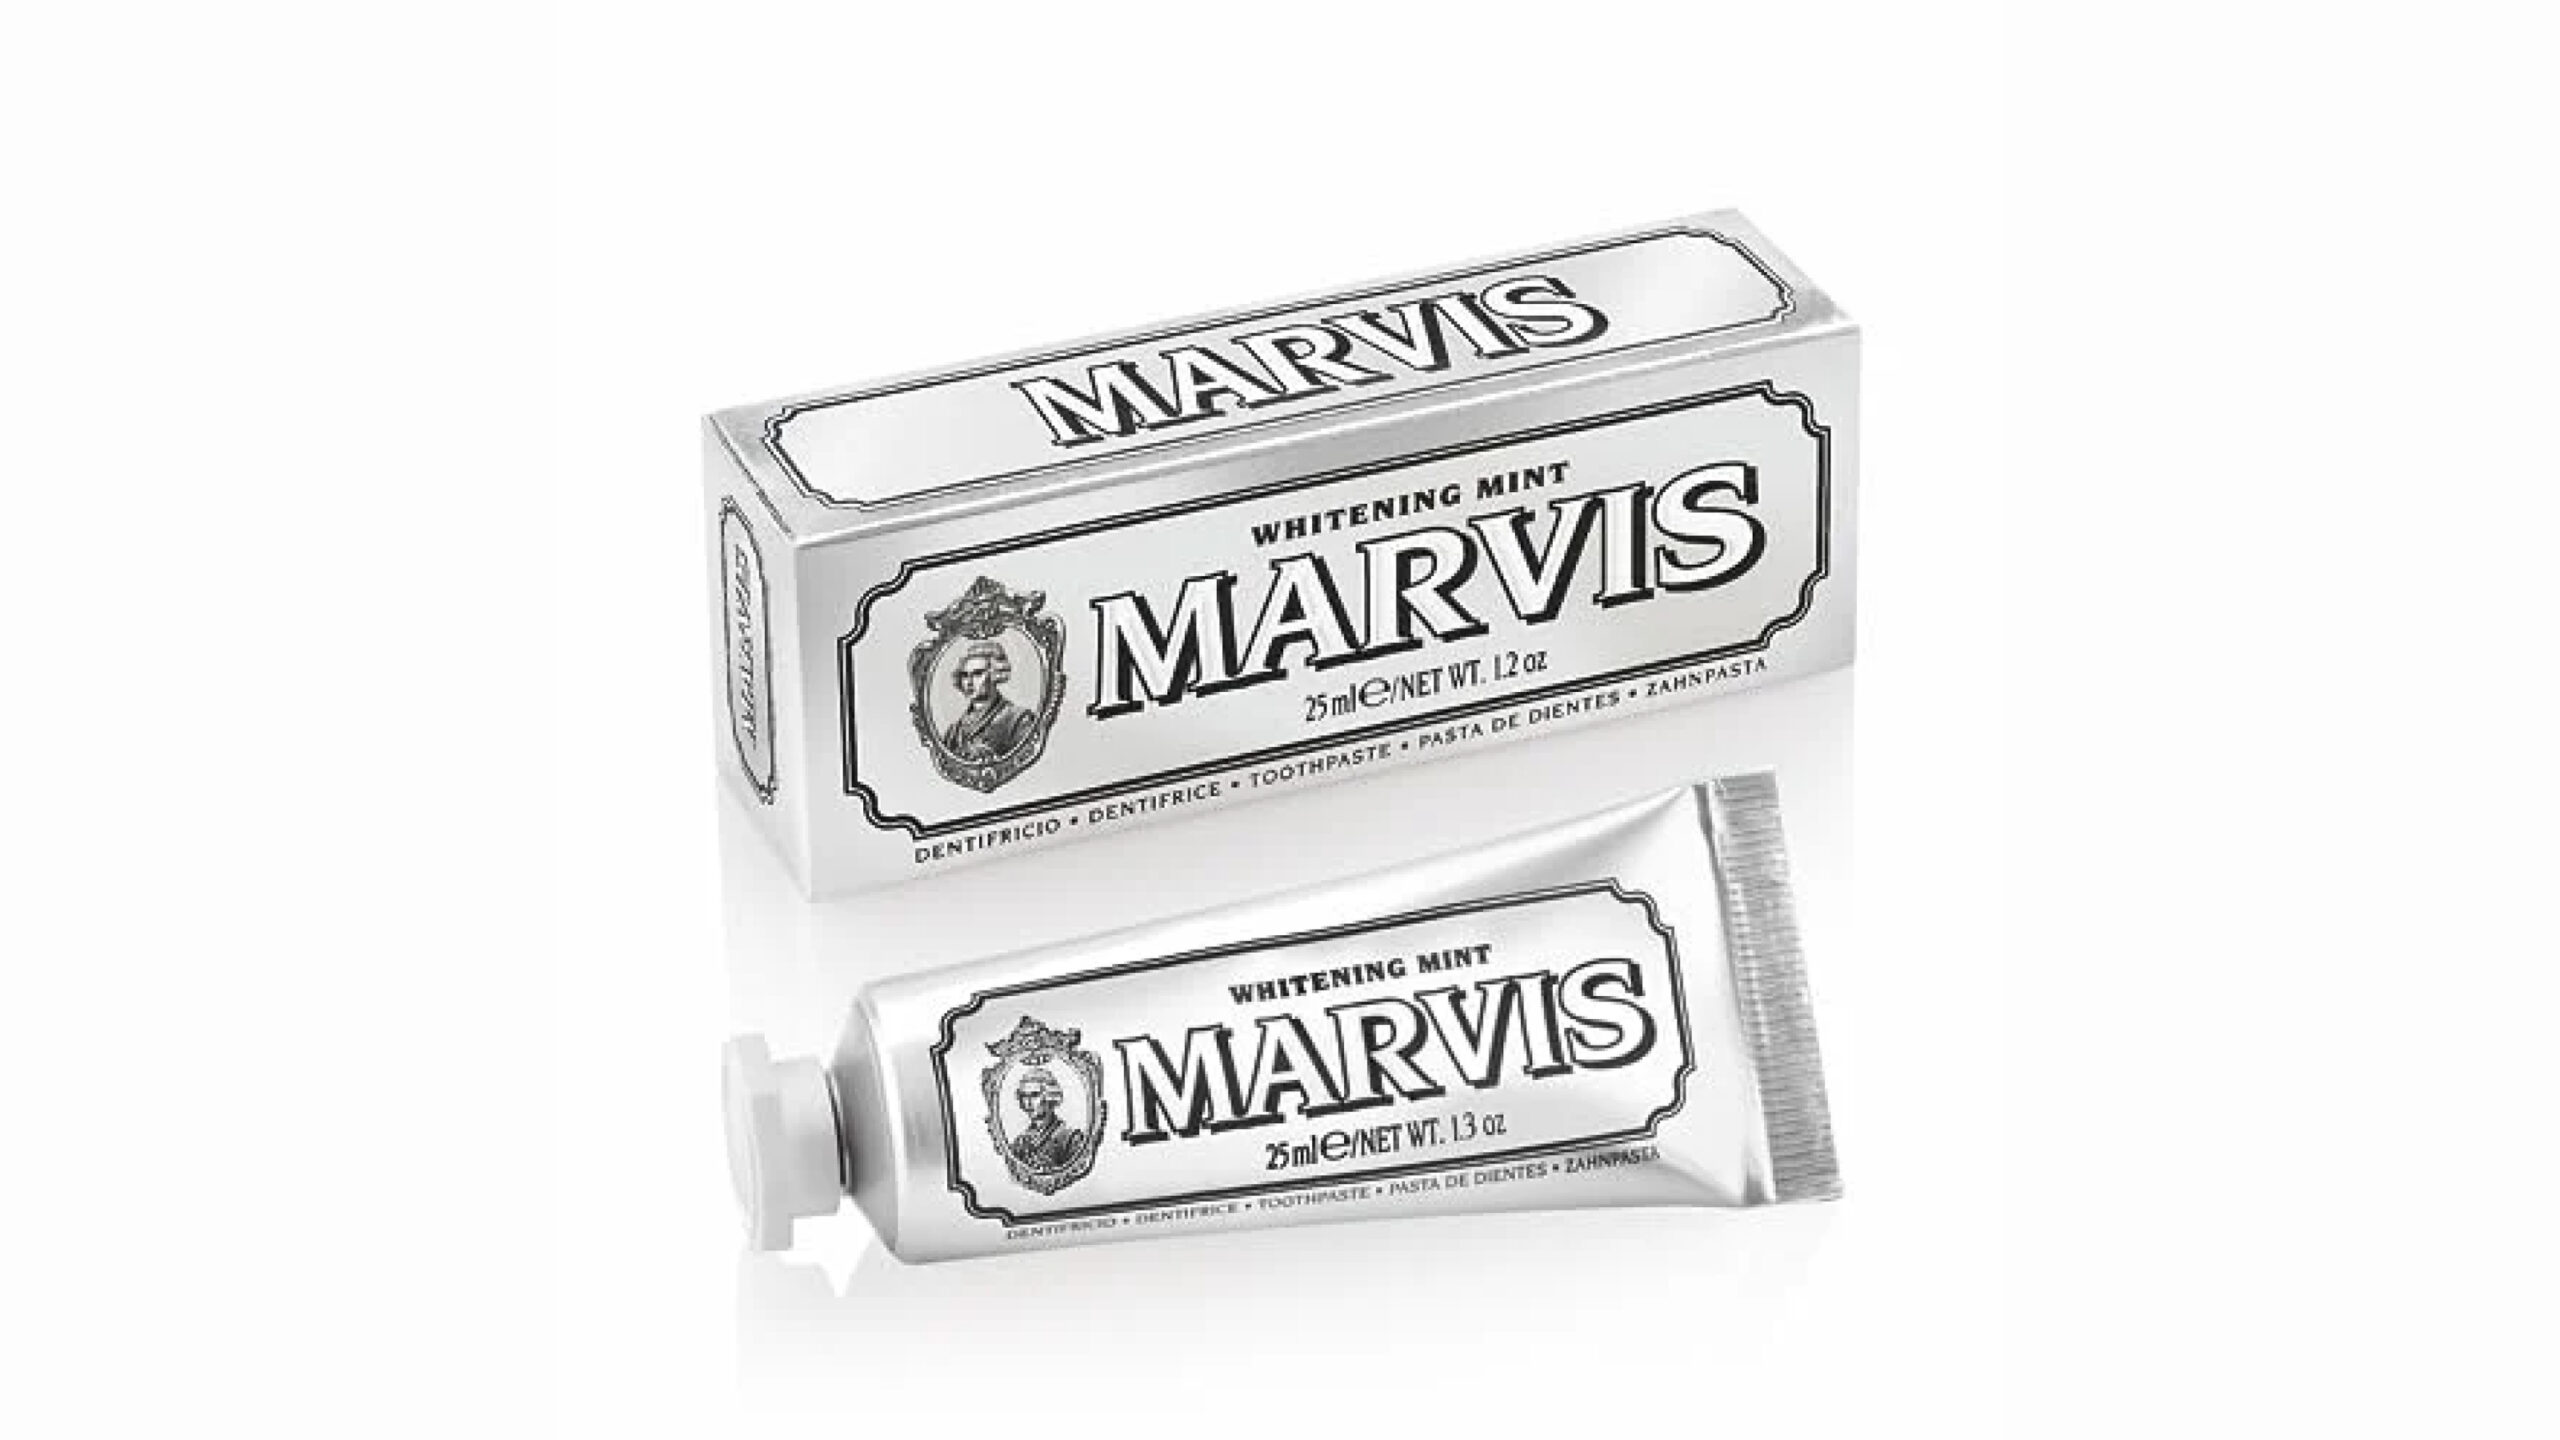 a packet of marvis whitening mint toothpaste